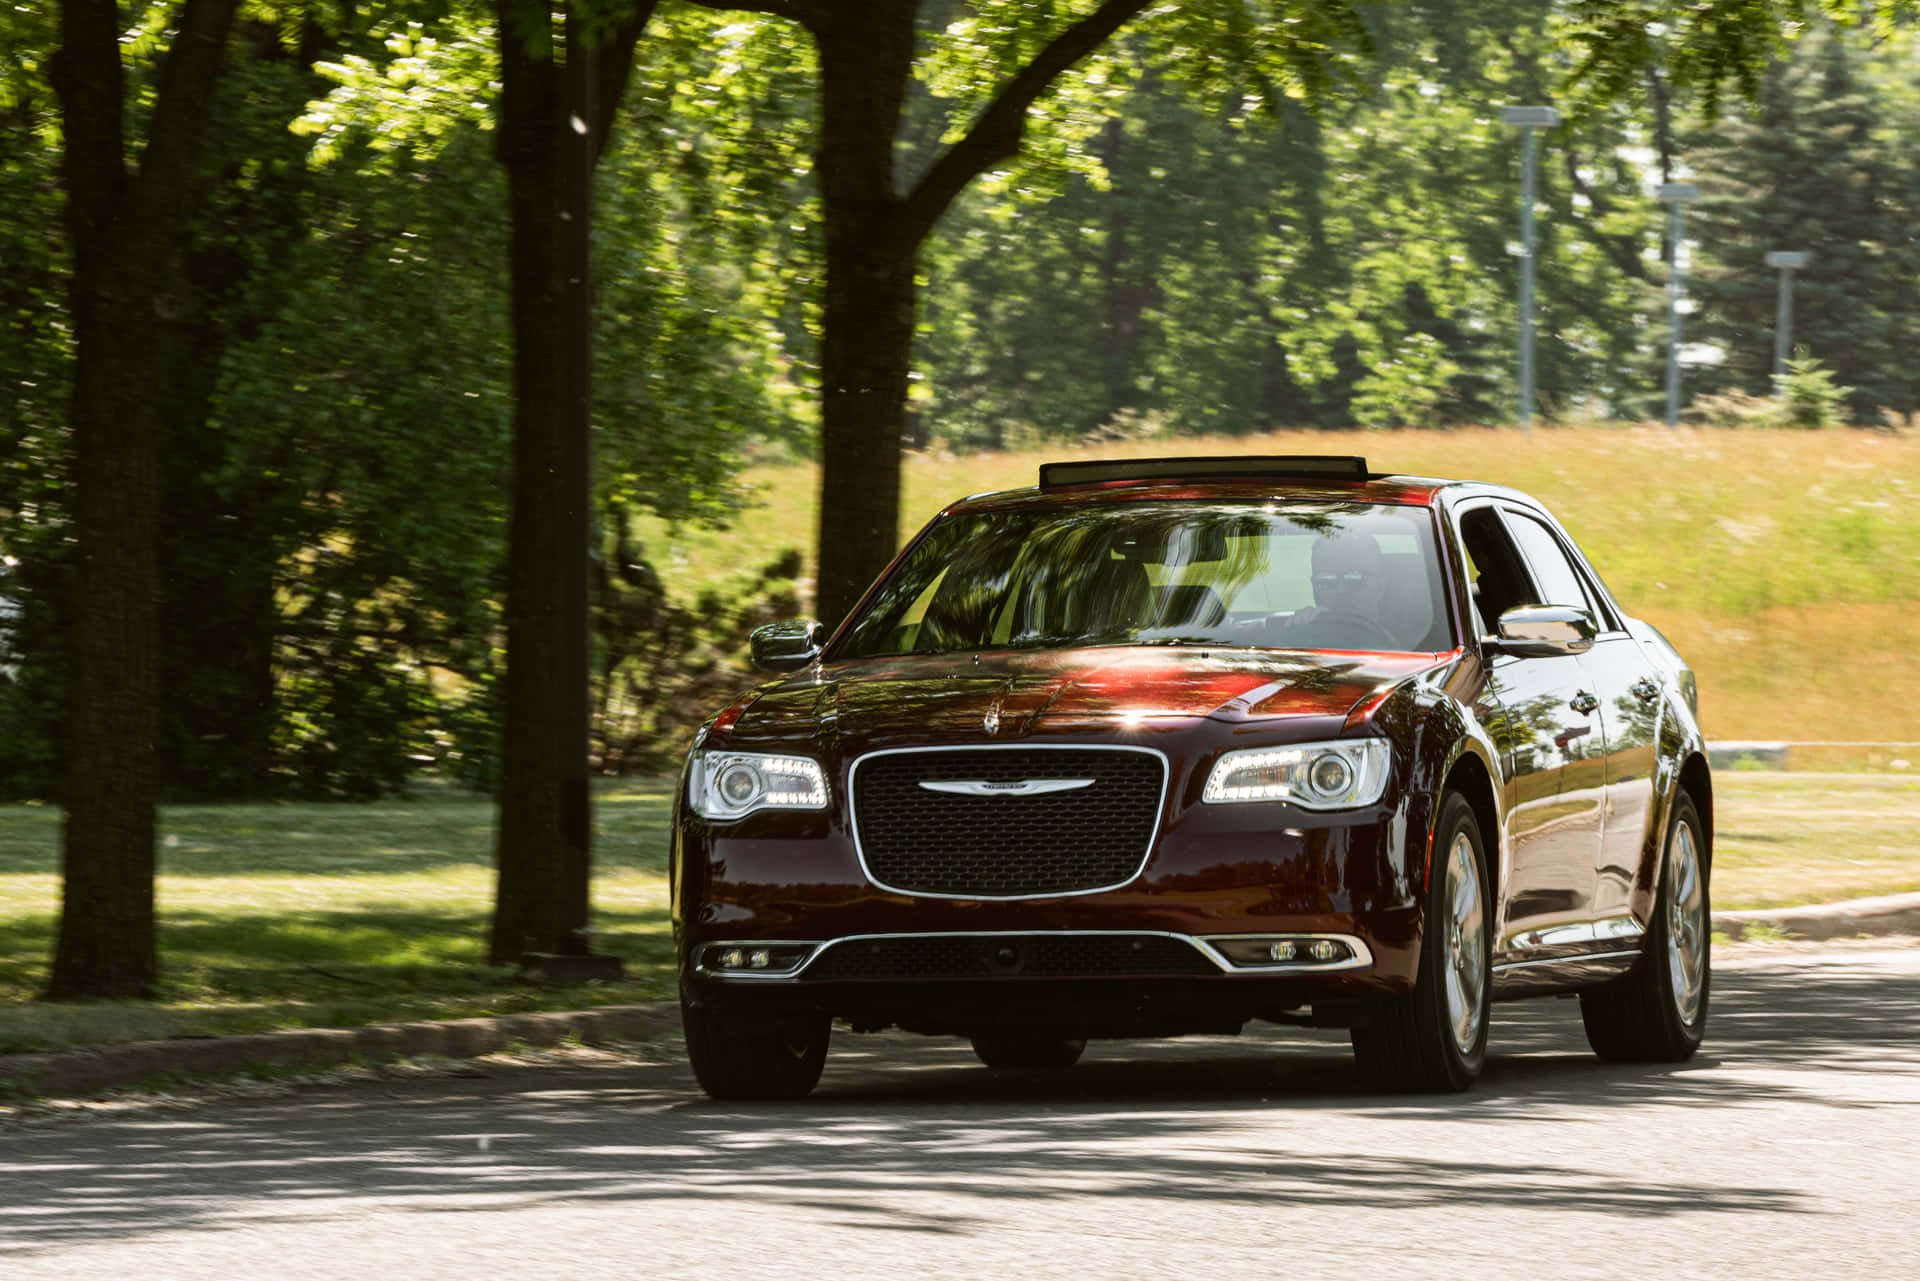 "Experience Luxury with the Chrysler Lineup"